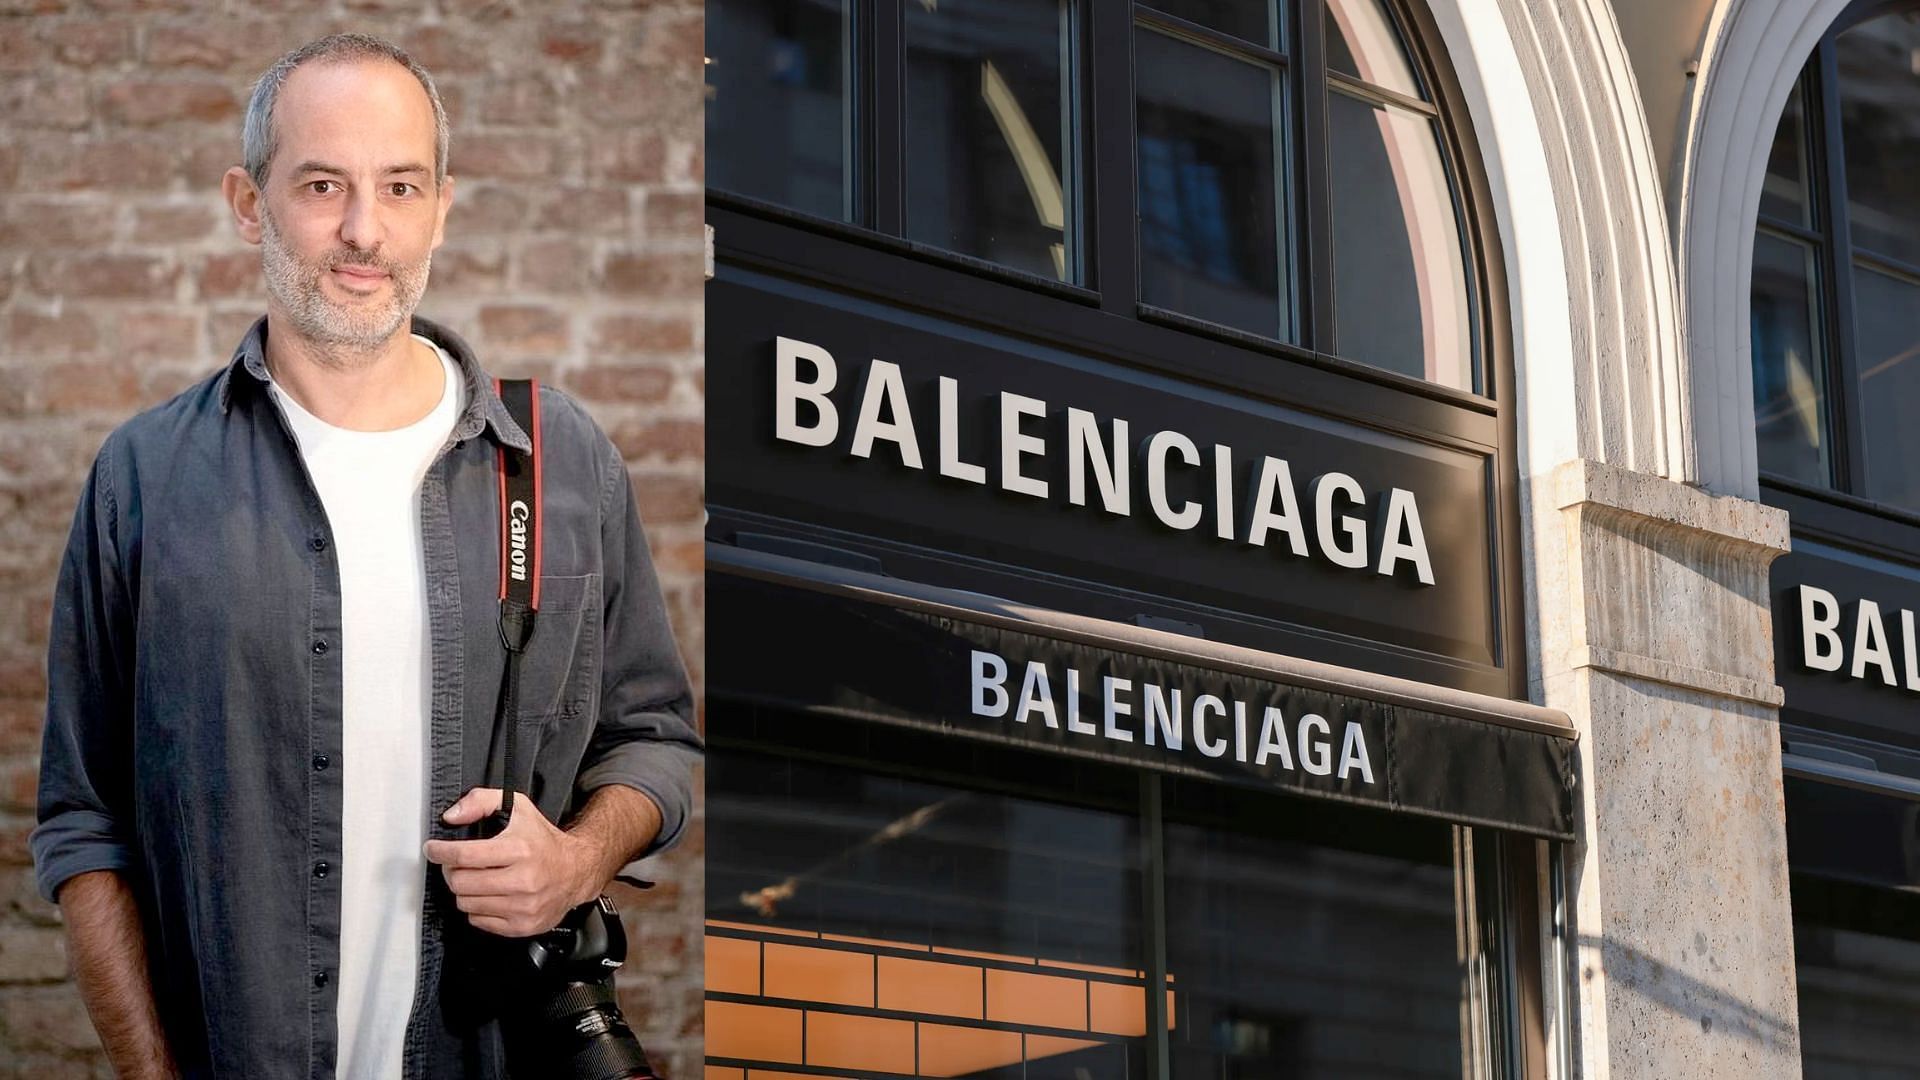 Balenciaga campaign photographer faces severe backlash as he attempts to absolve himself (image via Gabriele Galimberti and Getty/Jeremy Moeller)